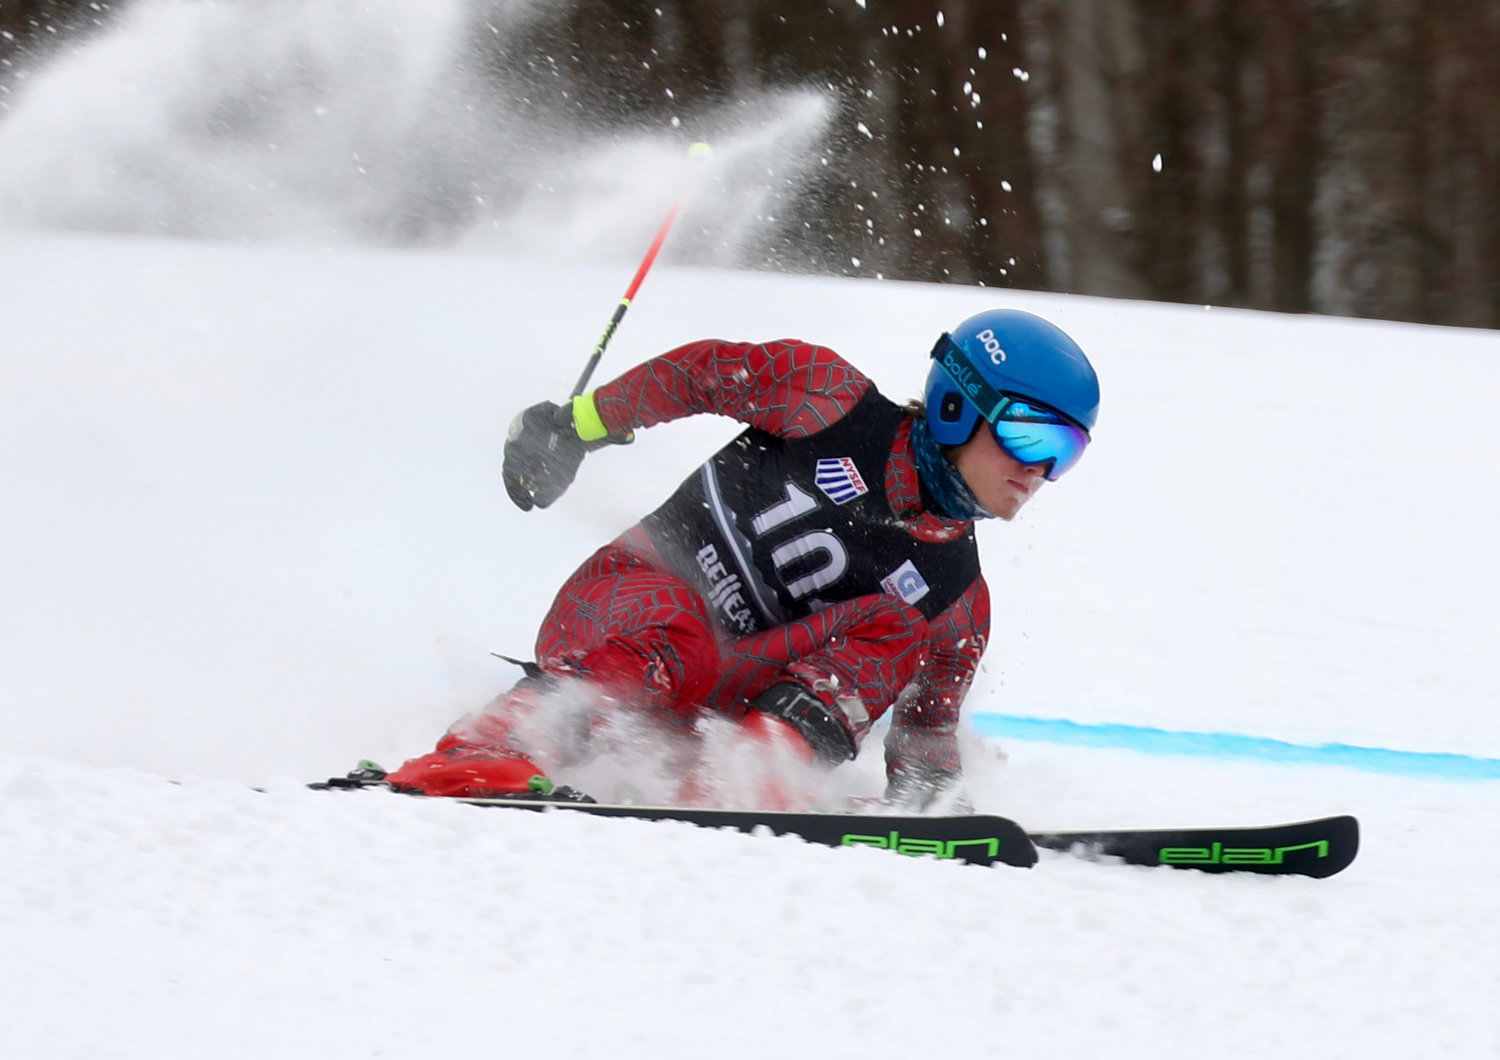 Using his edges cutting through the slalom gates, Tri-Valley junior Austin Hartman recorded fast times and finished third in both the morning and afternoon encounters.